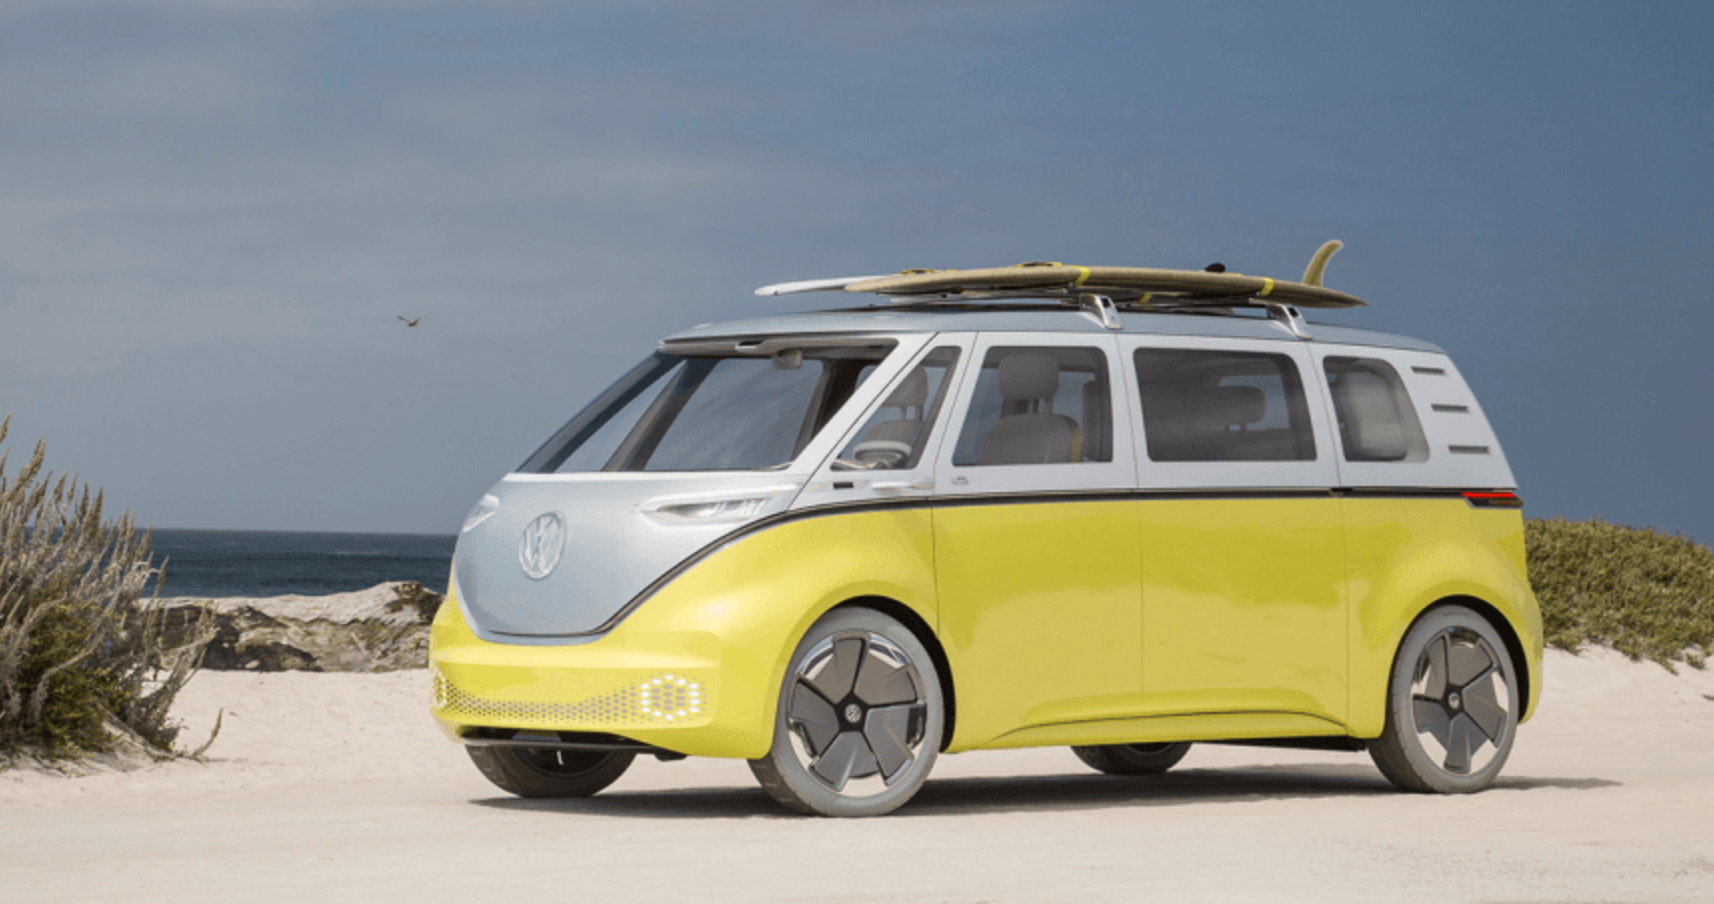 The ID. California to be Volkswagen’s electric camper